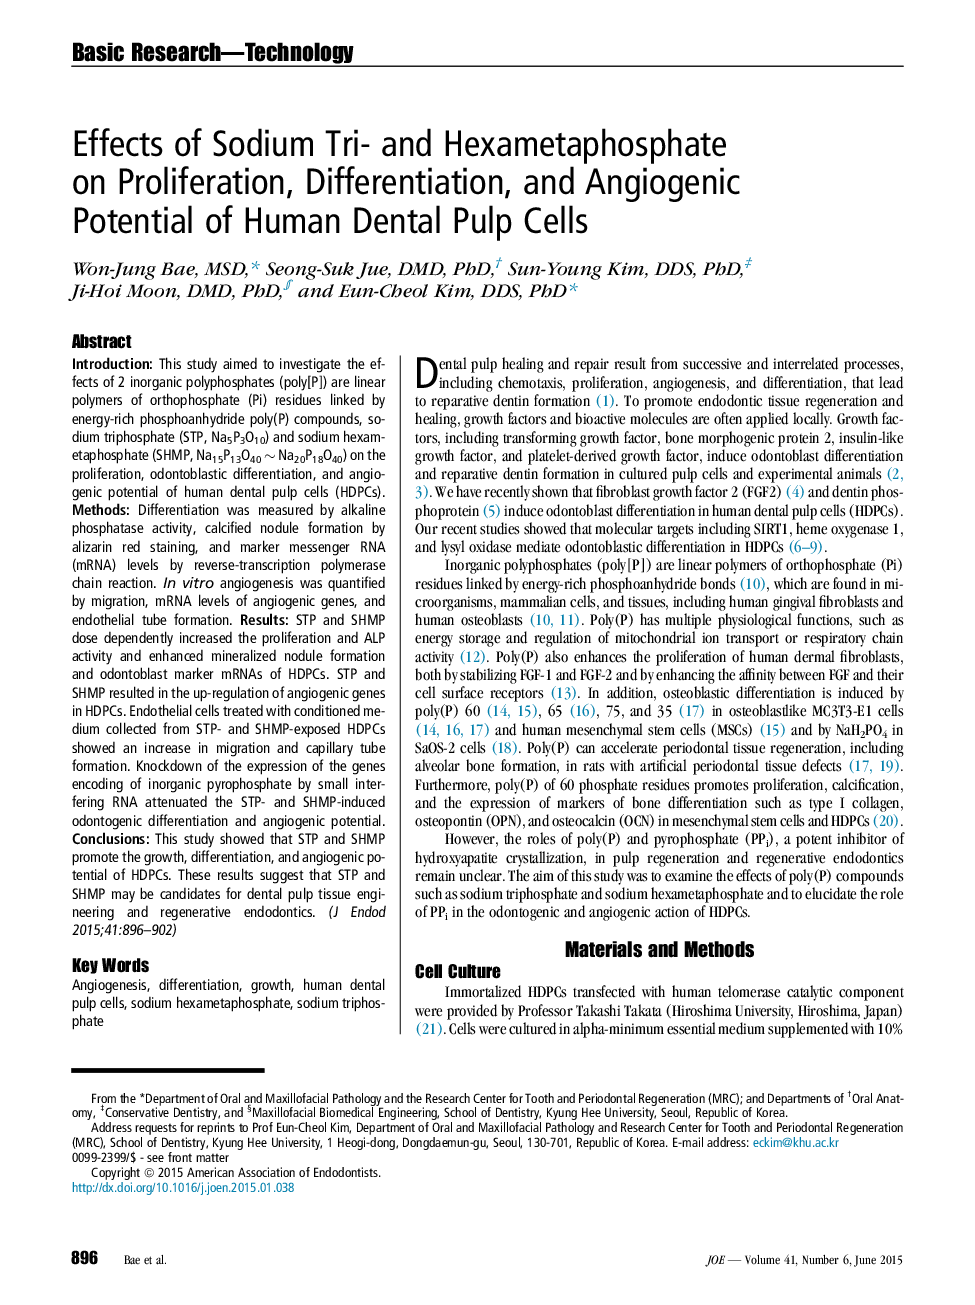 Effects of Sodium Tri- and Hexametaphosphate on Proliferation, Differentiation, and Angiogenic Potential of Human Dental Pulp Cells